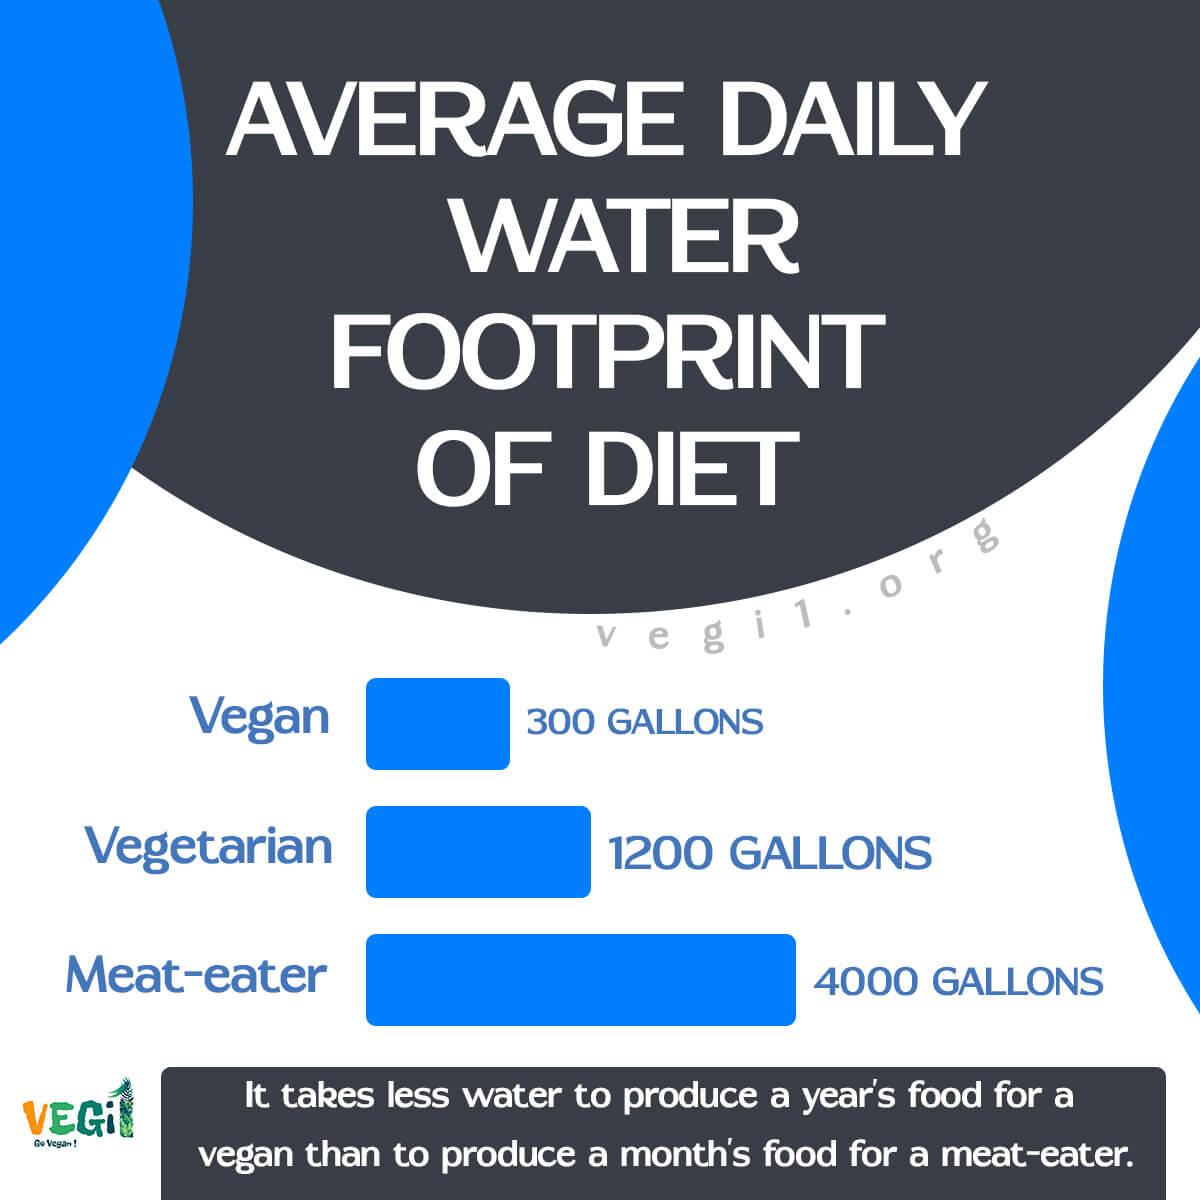 Veganism: A Simple Way to Save Water